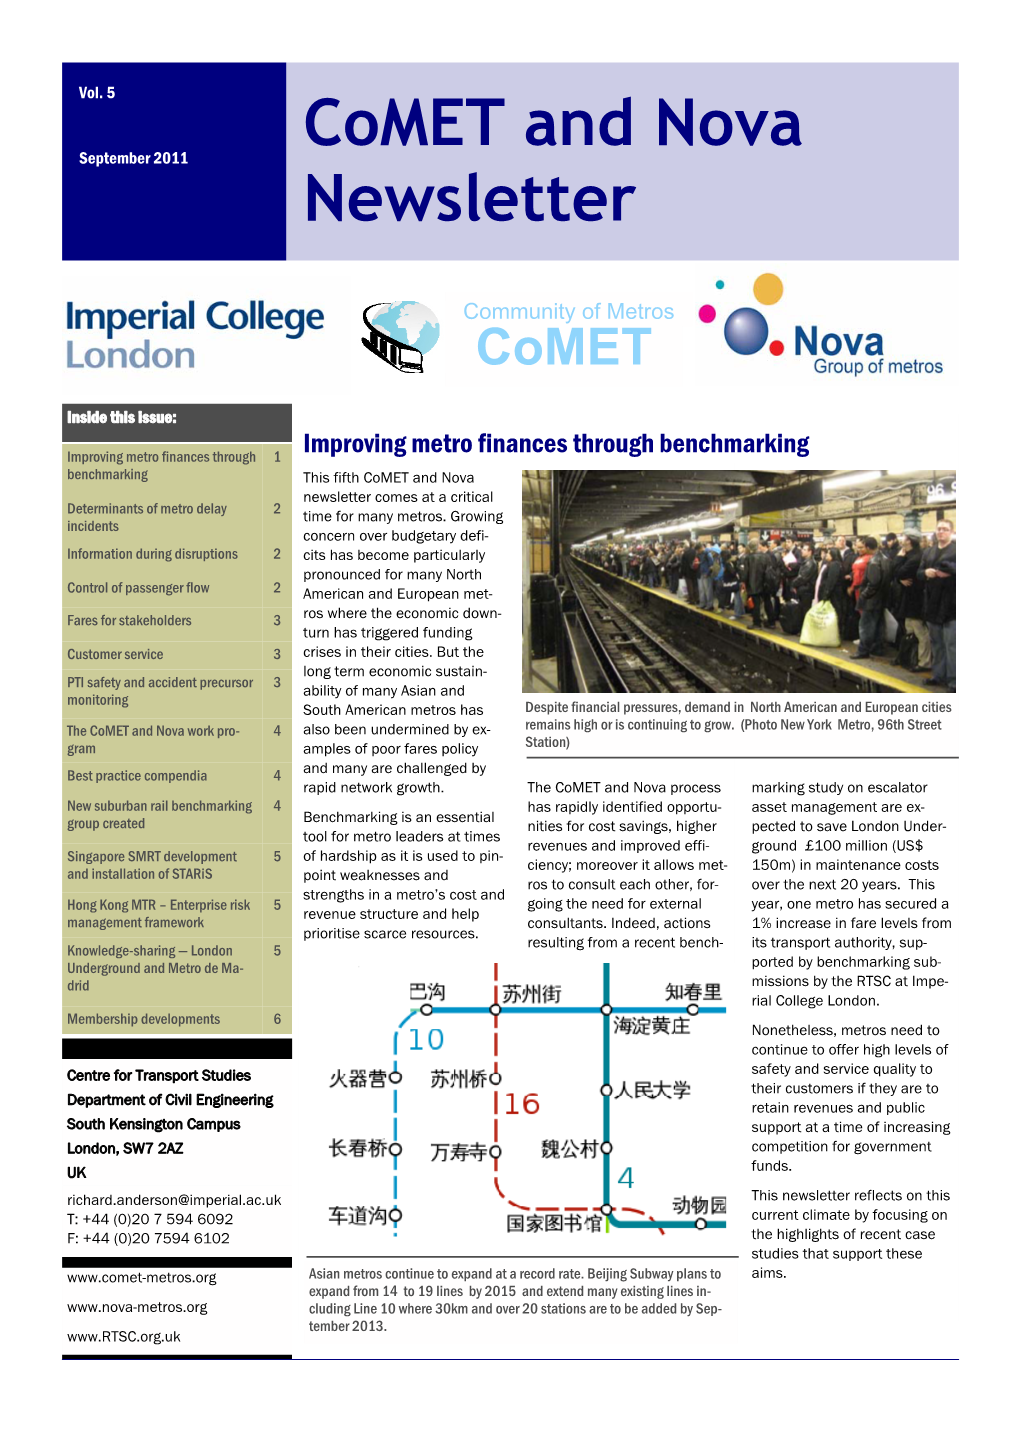 Comet and Nova Newsletter Comes at a Critical Determinants of Metro Delay 2 Time for Many Metros